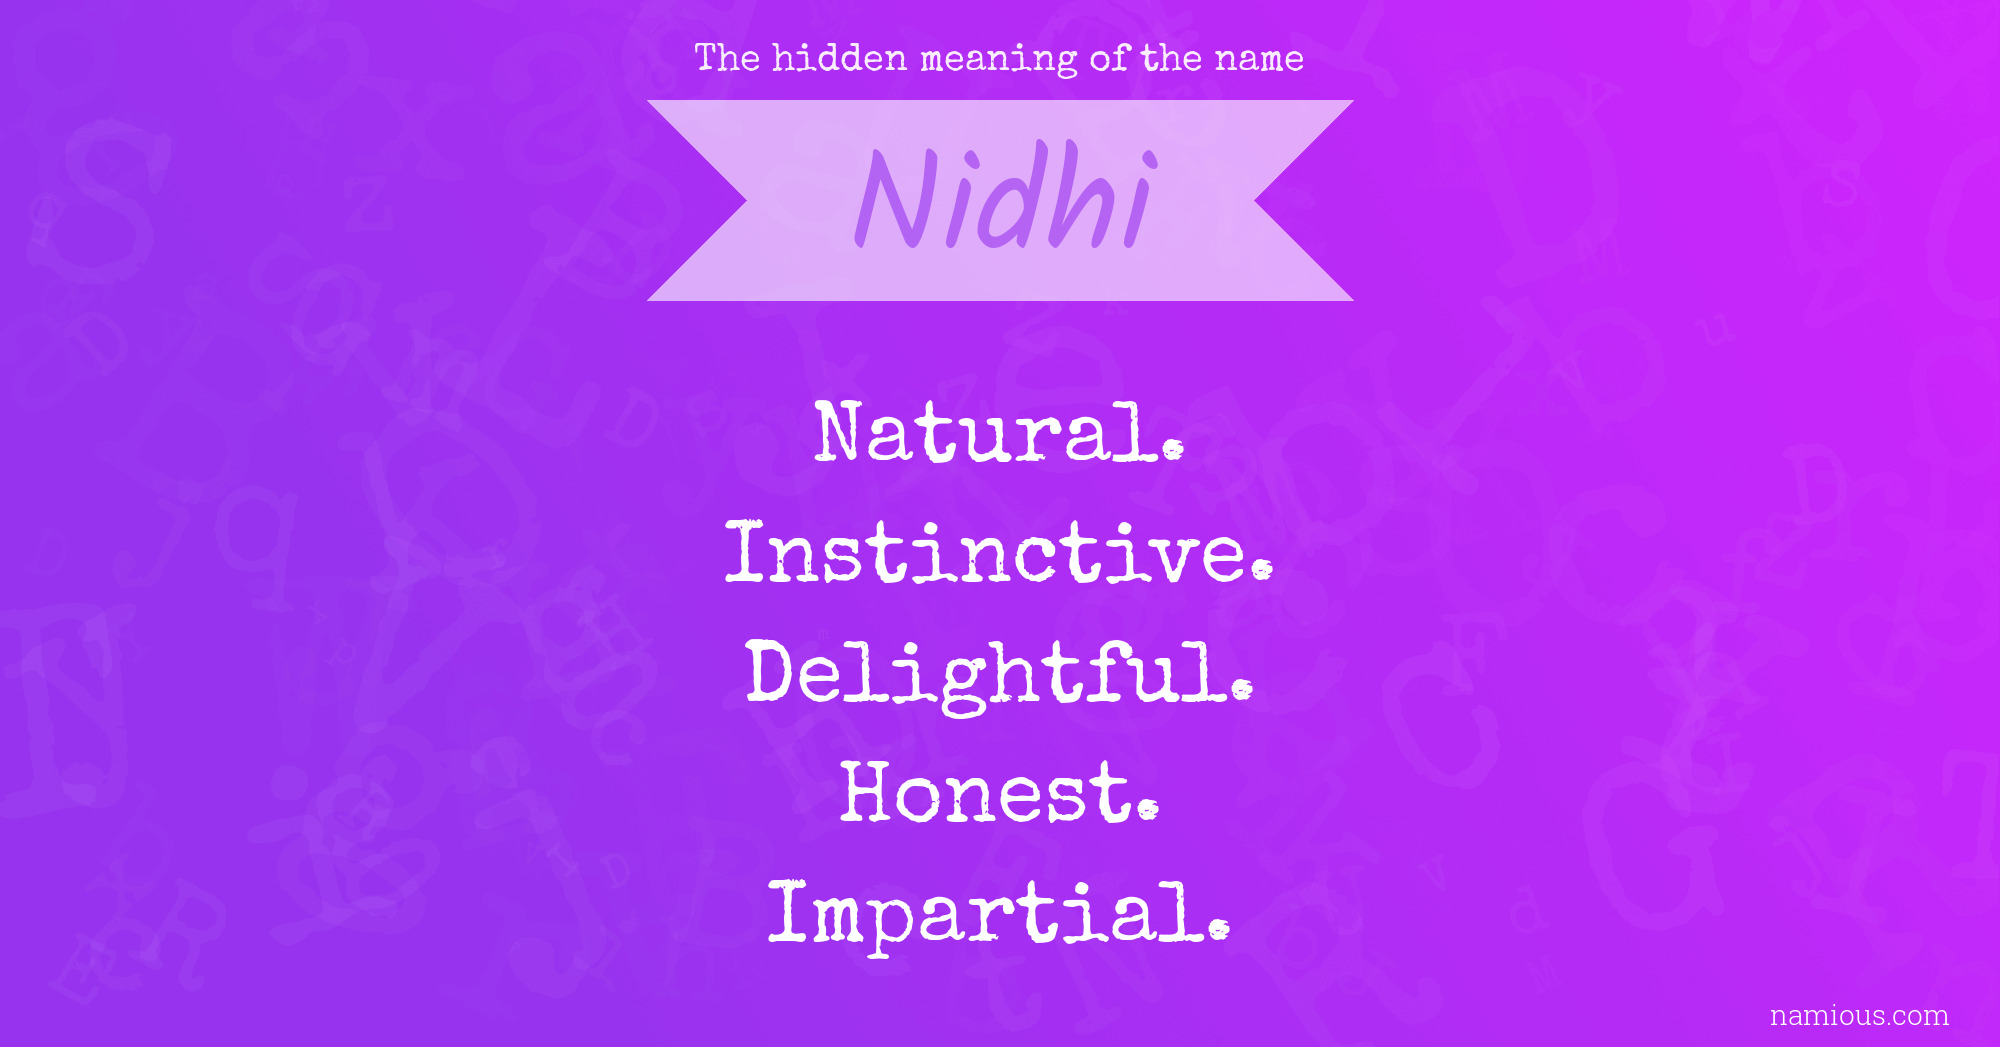 The hidden meaning of the name Nidhi